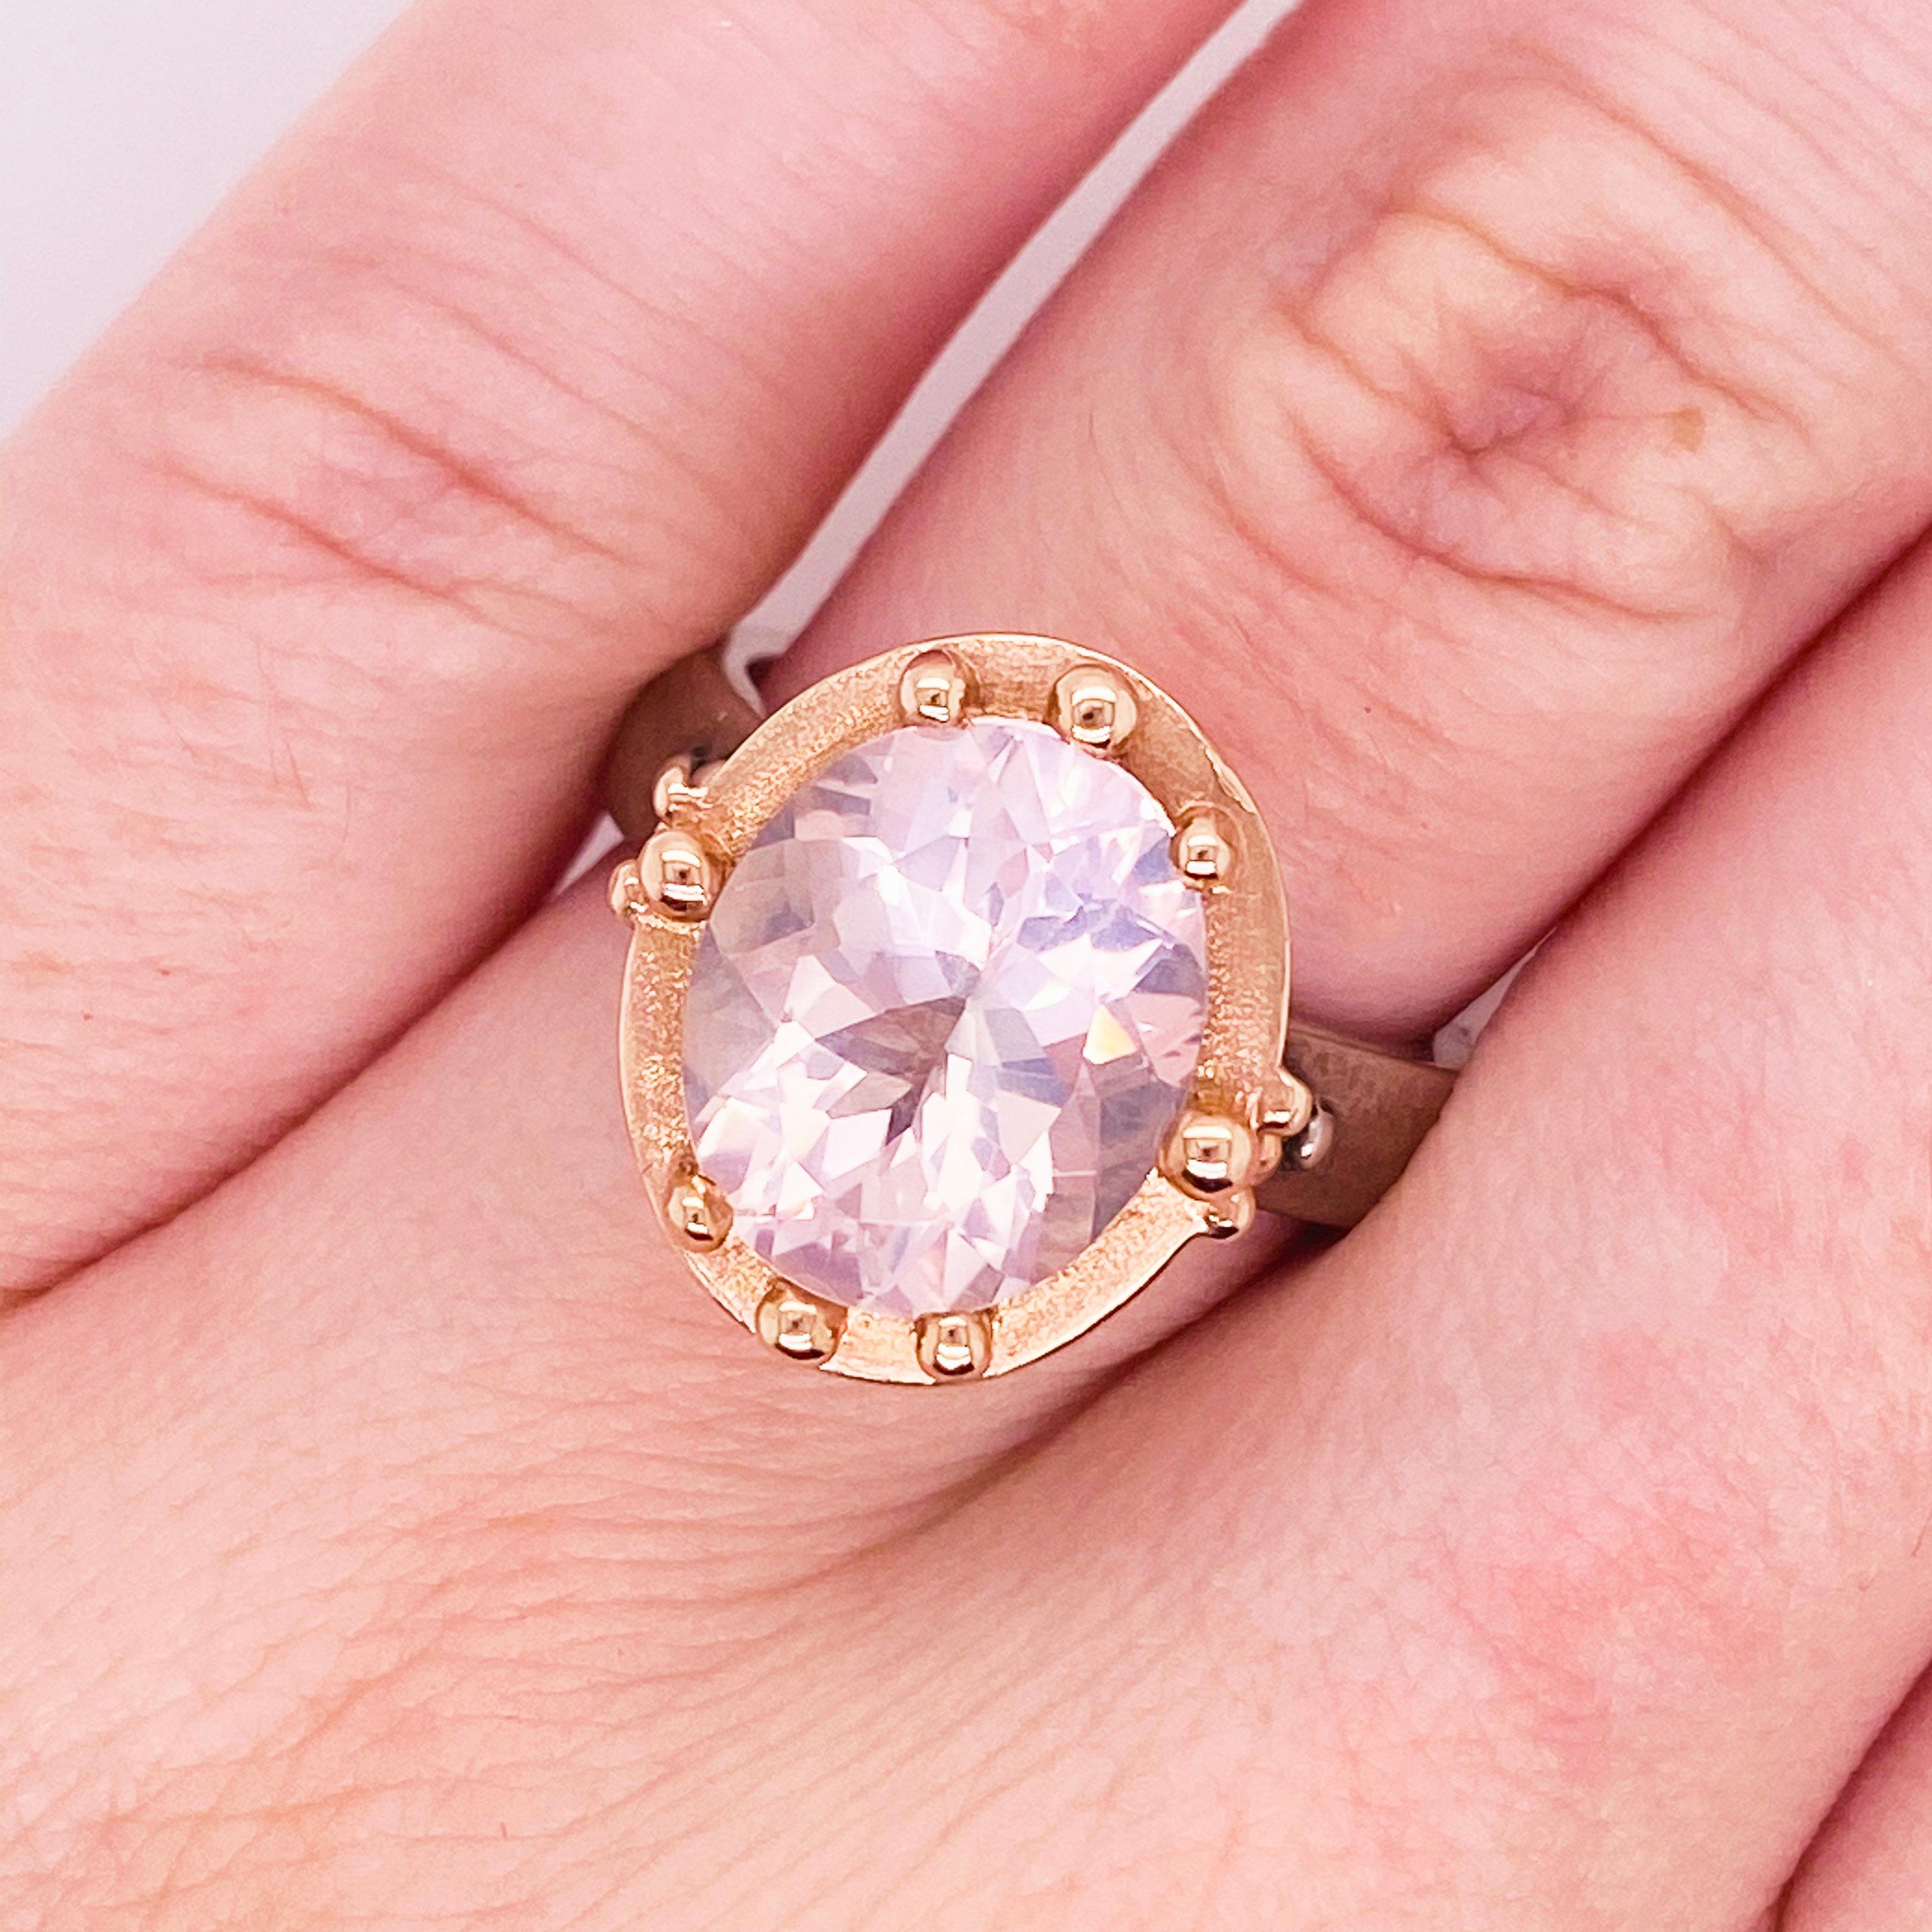 This stunningly beautiful pink oval rose quartz is set in 14 karat rose gold with a sterling silver band will thrill you! The style is both modern and classic with the matte textures combined with bright round metal accents at the same time! This